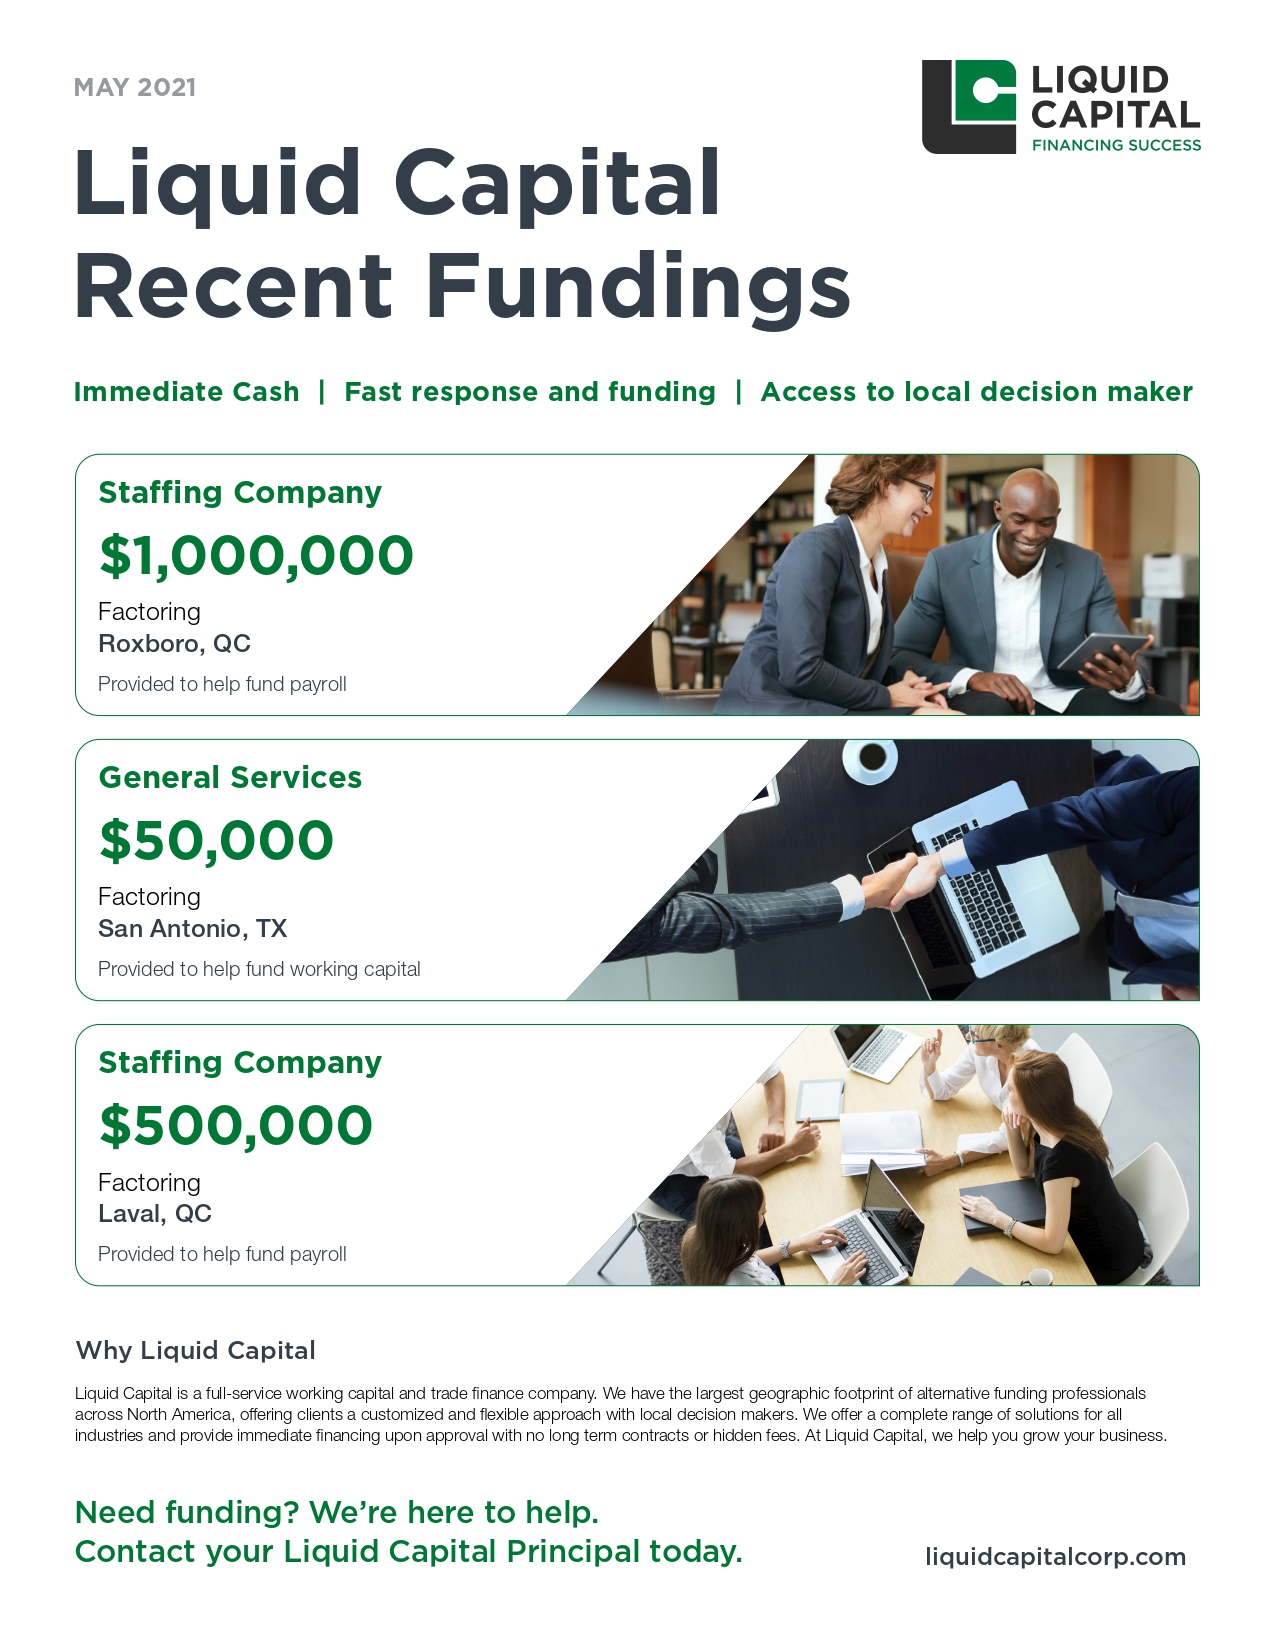 May 2021 Recent Fundings